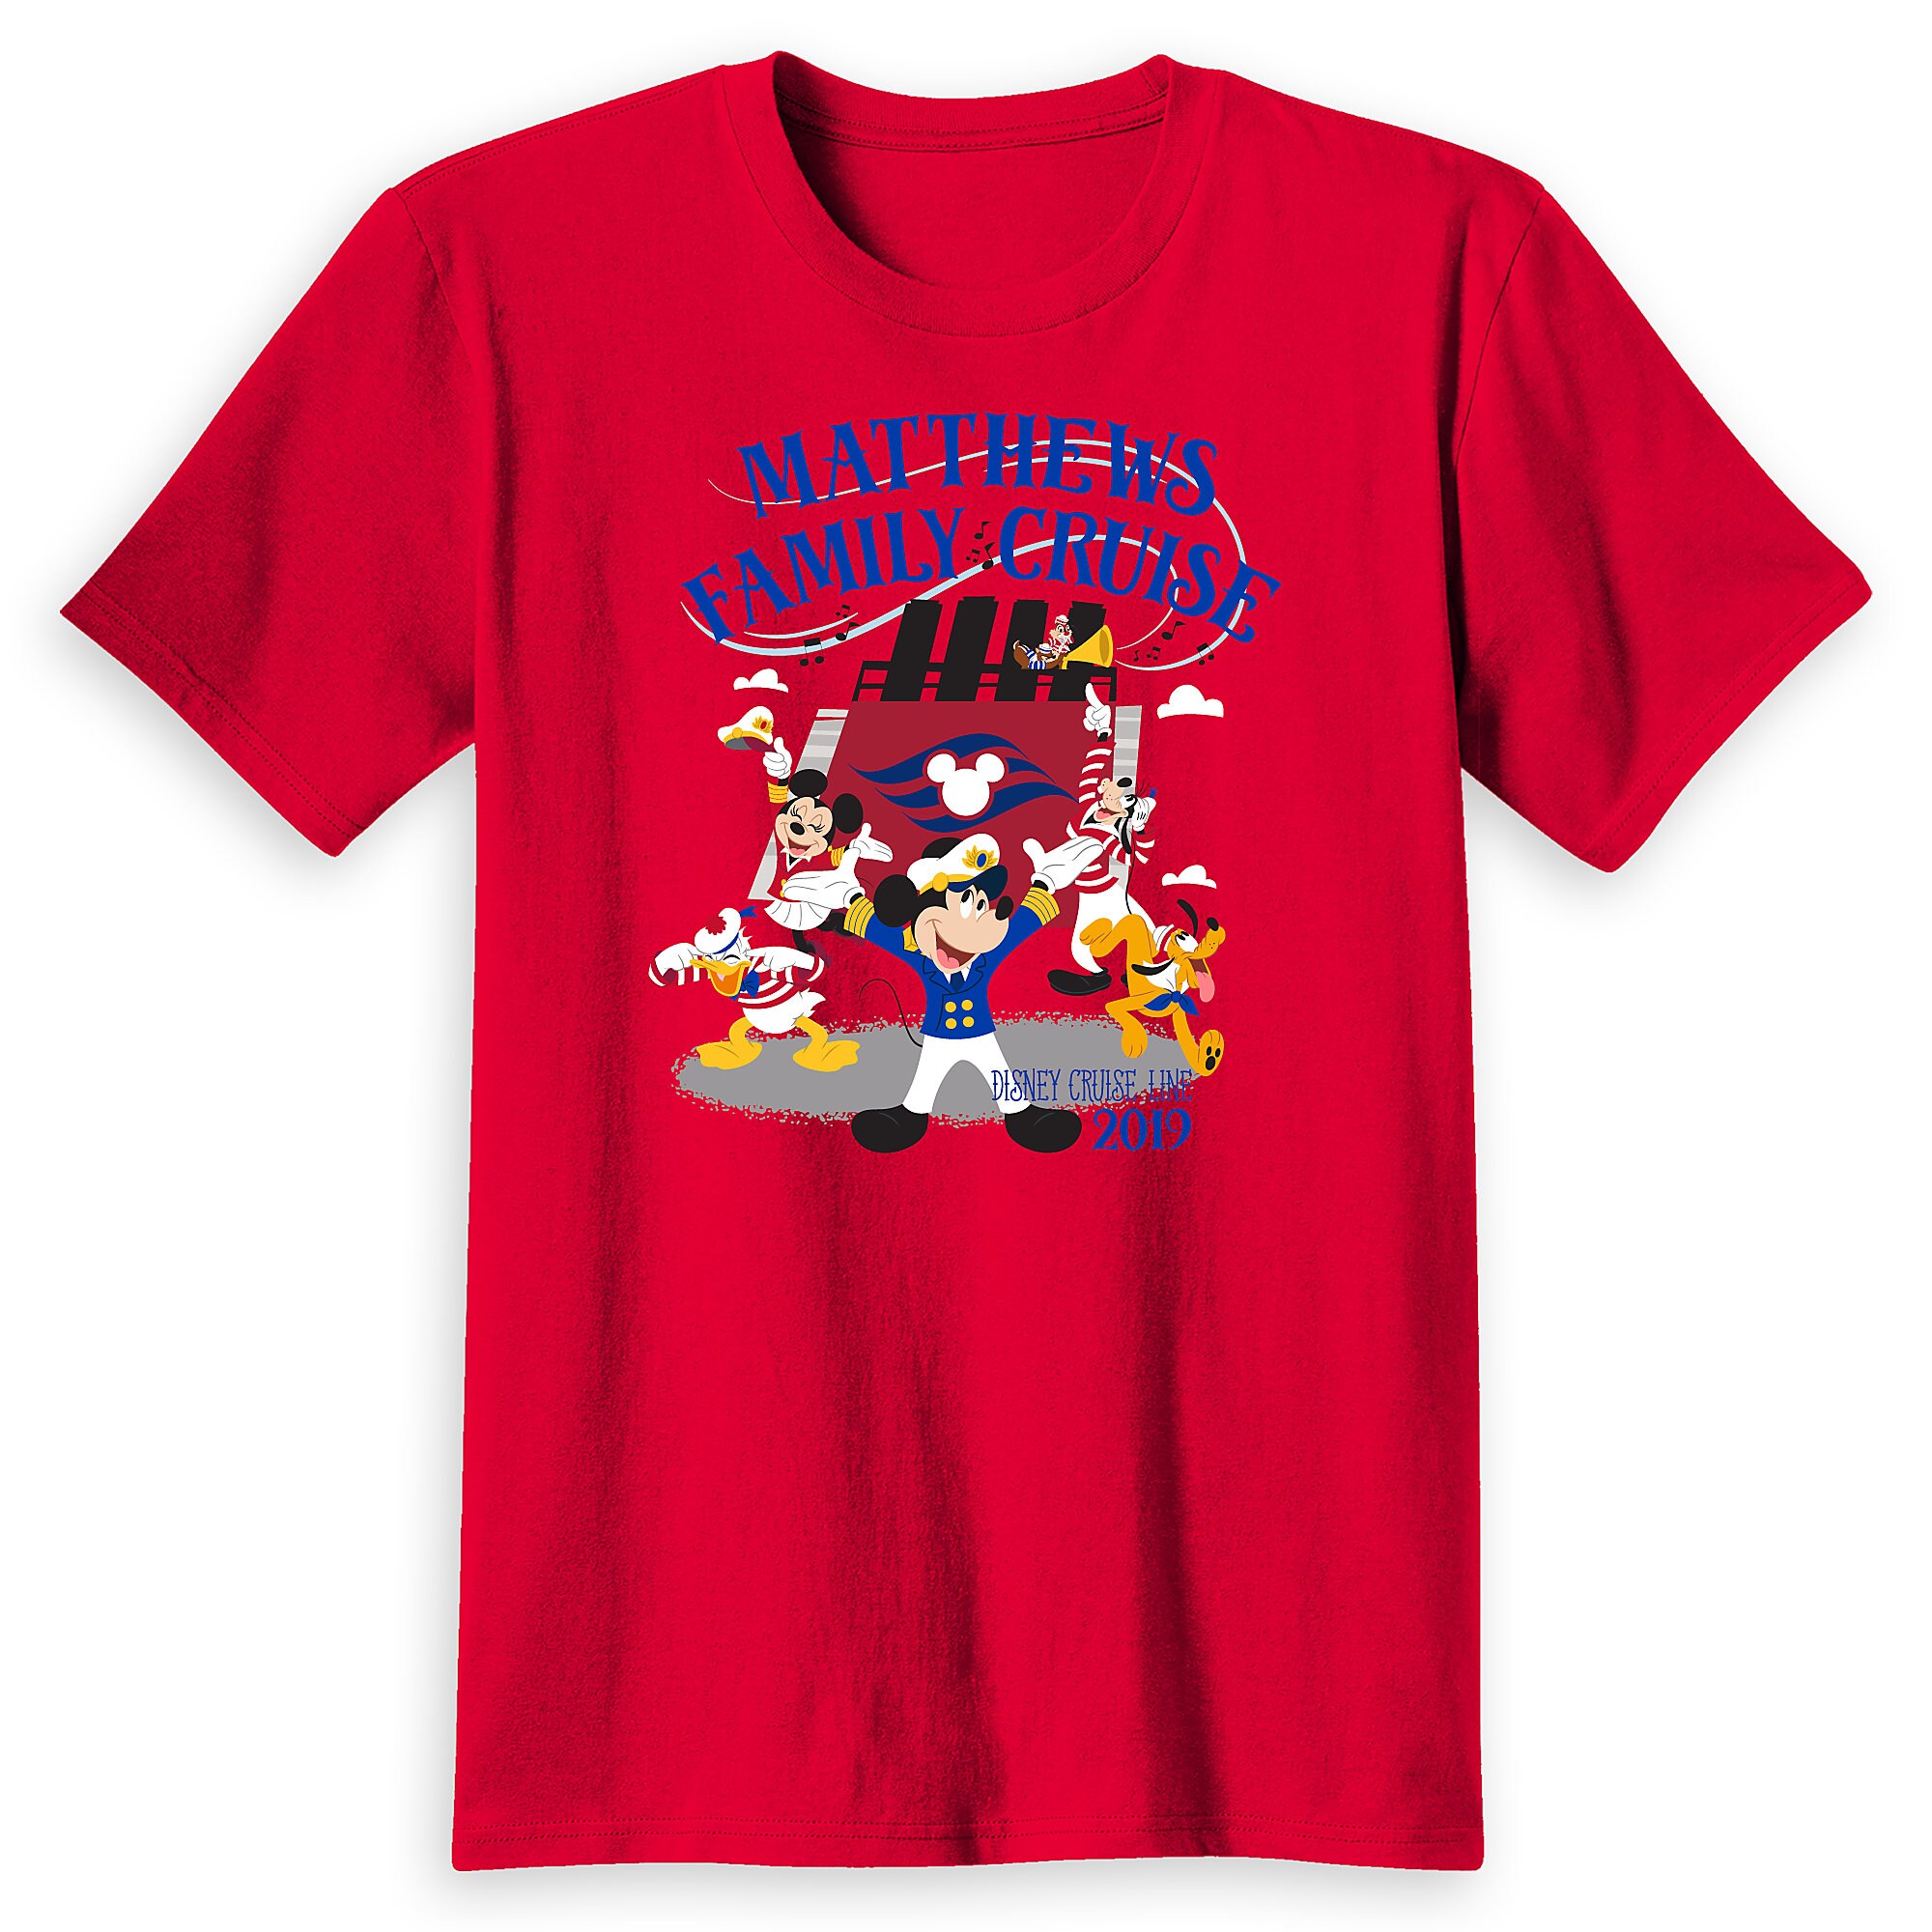 Adults Captain Mickey Mouse and Crew Disney Cruise Line Family Cruise 2019 T Shirt Customized 